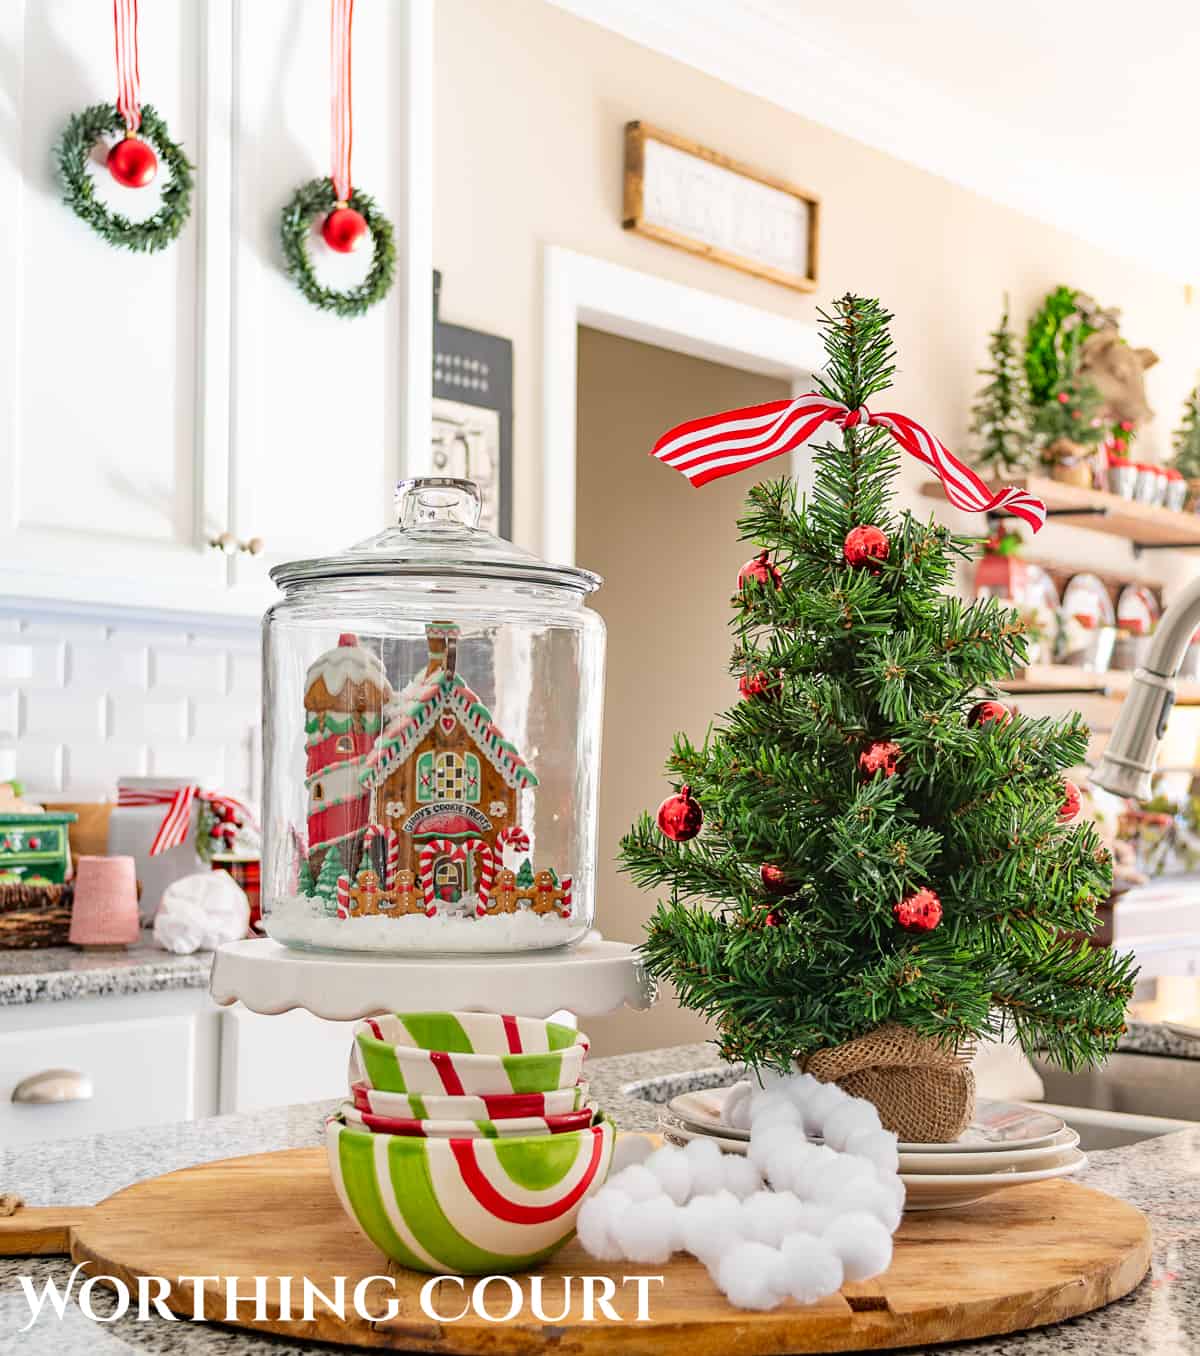 Christmas vignette on a kitchen island with a small tree and ceramic Christmas house.